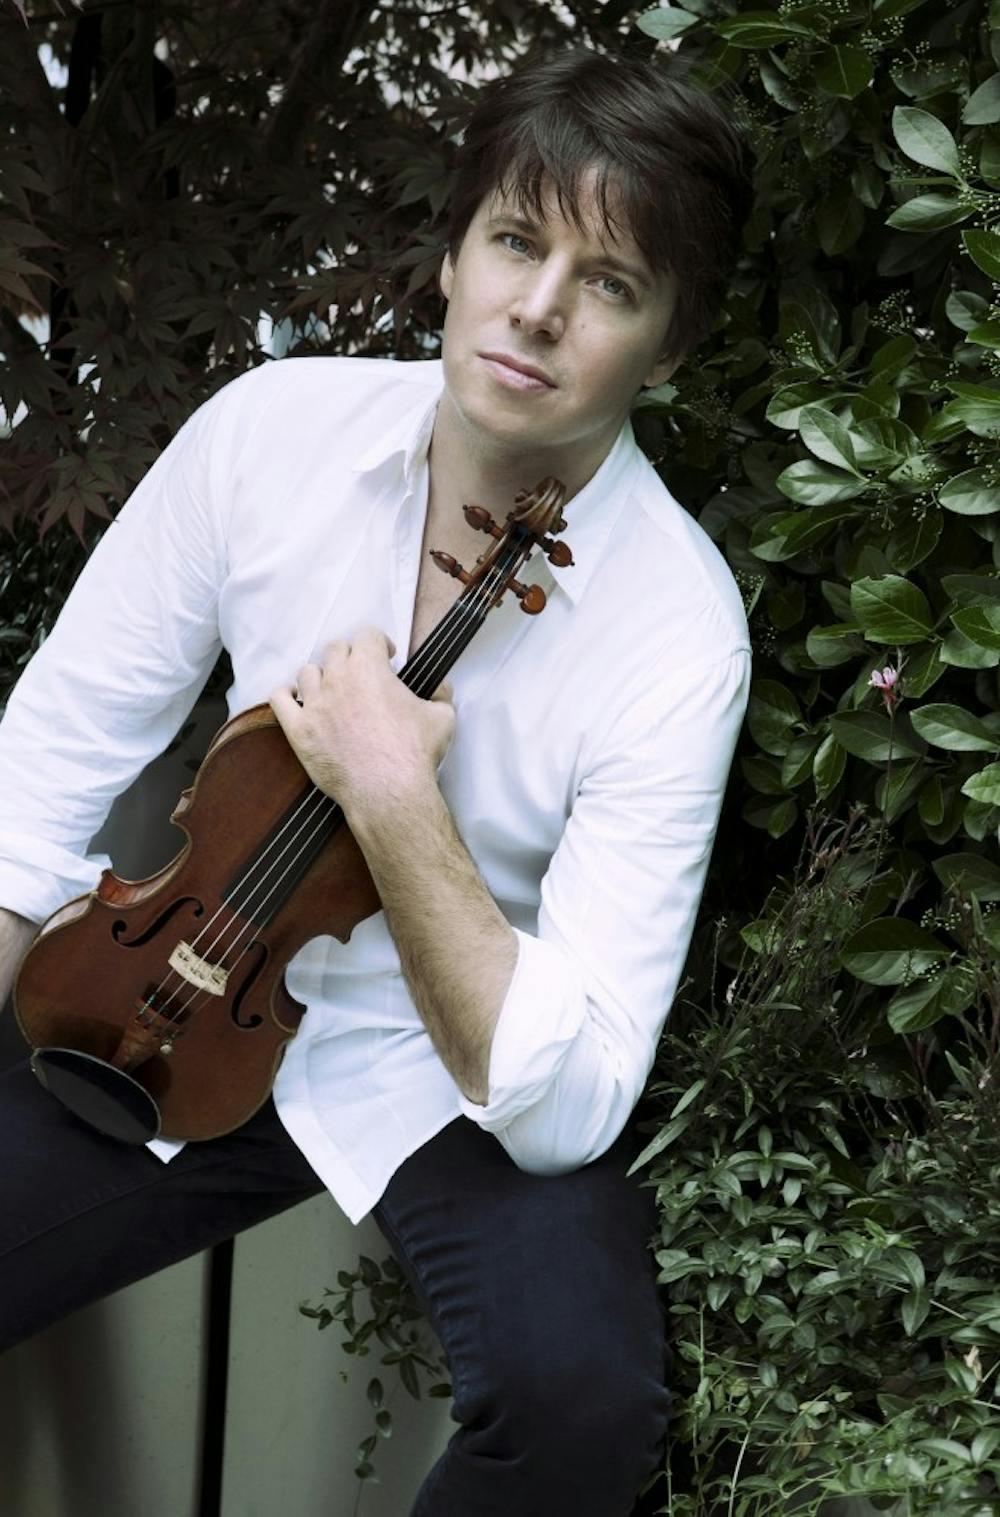 Violinist Joshua Bell will be playing a show at John R. Emens Auditorium Feb. 17 at 7:30 p.m. Bell has been named an “Indiana Living Legend” and has been awarded the Indiana Governor’s Arts Award. PHOTO PROVIDED BY LISA MAZZUCCO